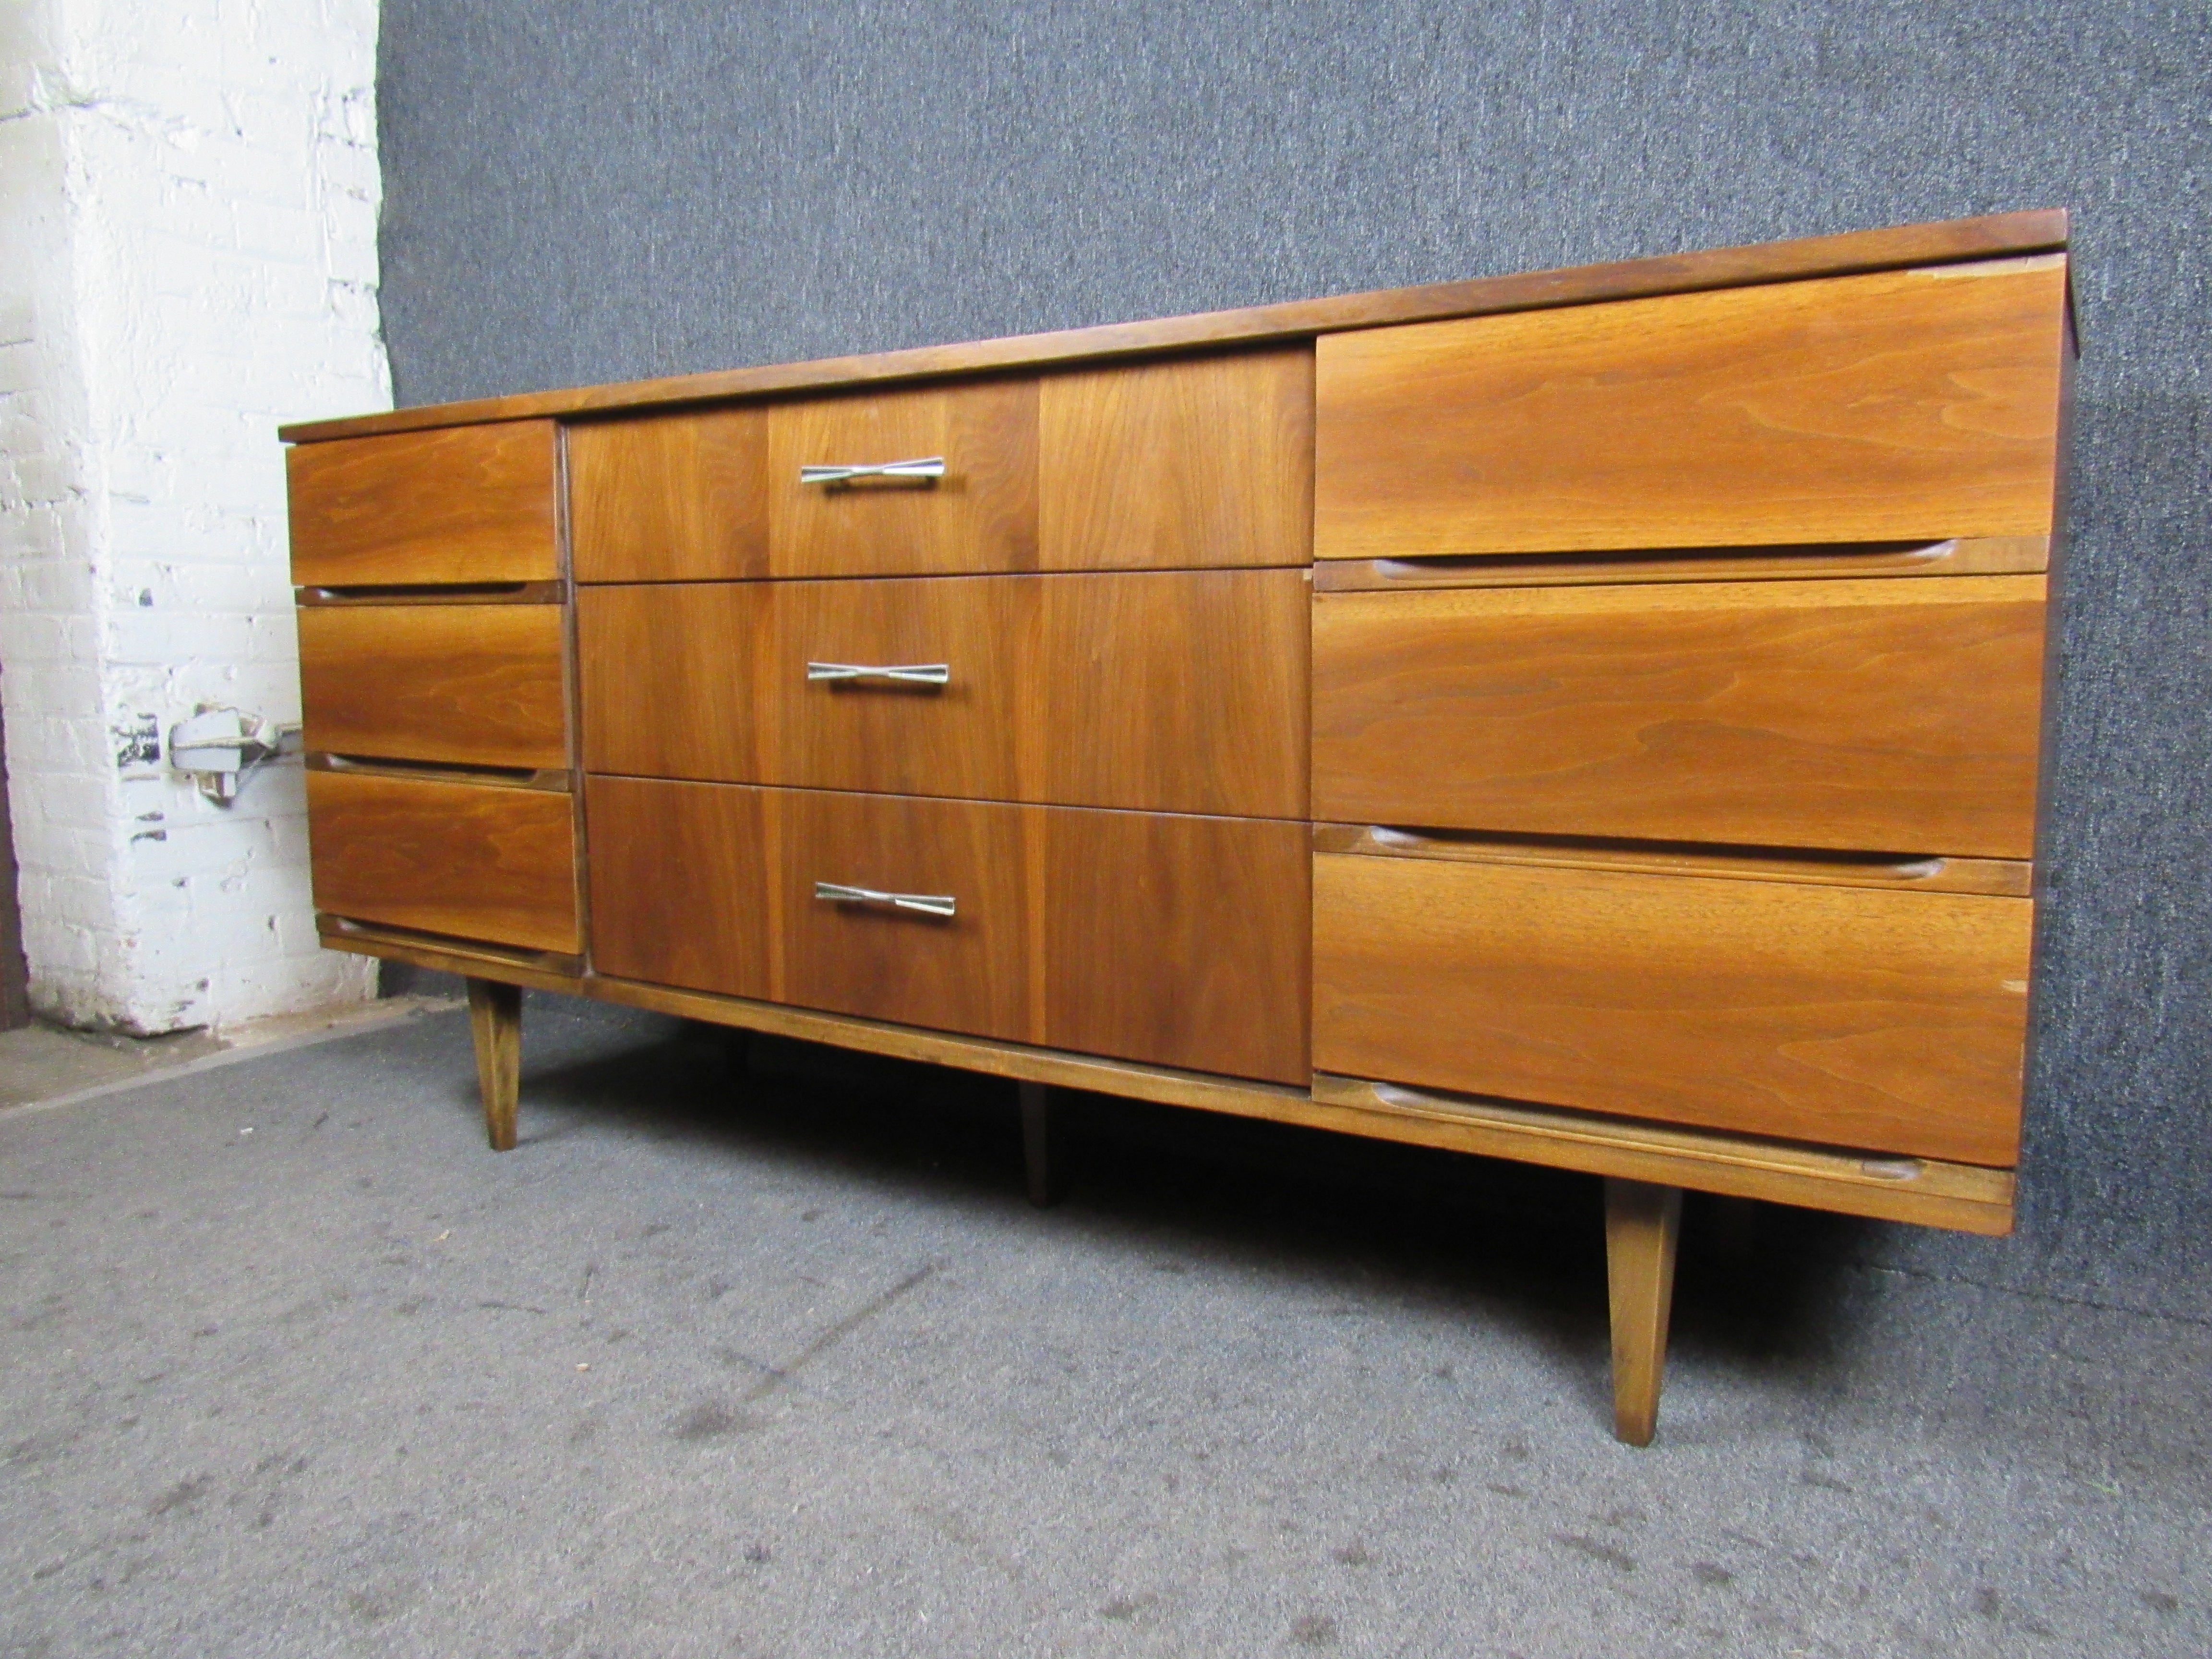 Lovely mid-sized vintage walnut credenza made by Harmony House for Sears Roebuck. Nine ample pull-out drawers feature stunning woodgrain that makes this dresser a statement piece for your home or office. Attractive bow tie handles sport authentic